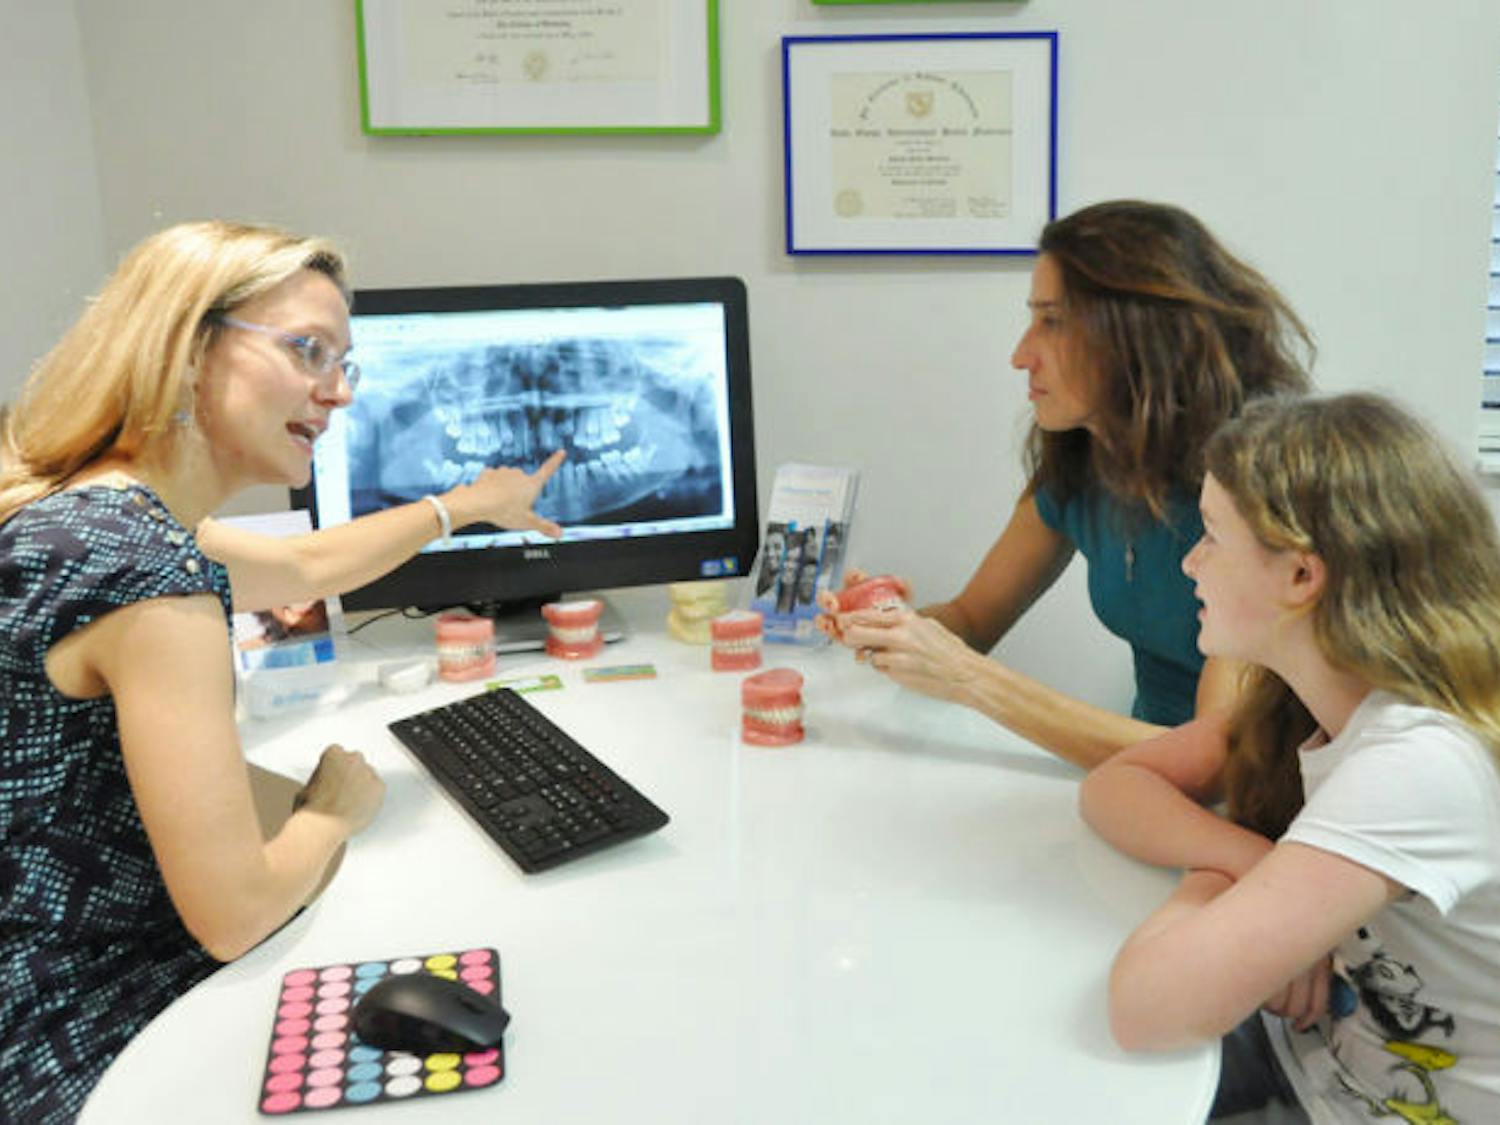 Dr. Nicole Mullally speaks to Cameron Varvel, 10, about braces. Mullally described the best way to maintain and clean braces using a 3-D instructional video.